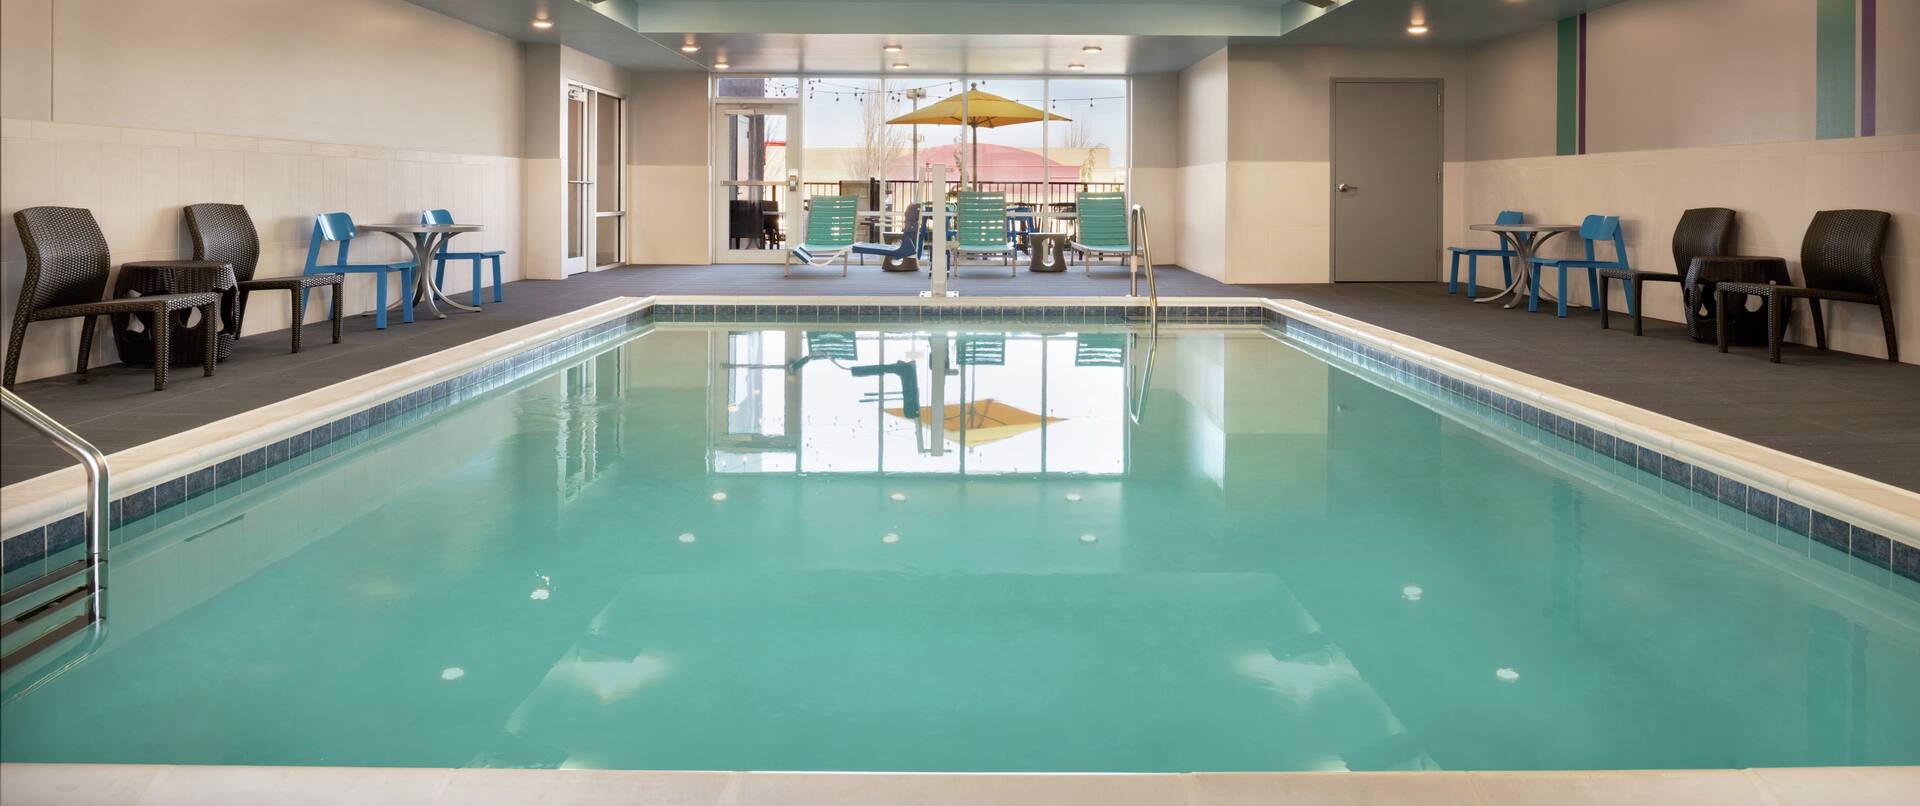 Spacious indoor pool featuring lounge chairs, accessible chair lift, and floor to ceiling window.